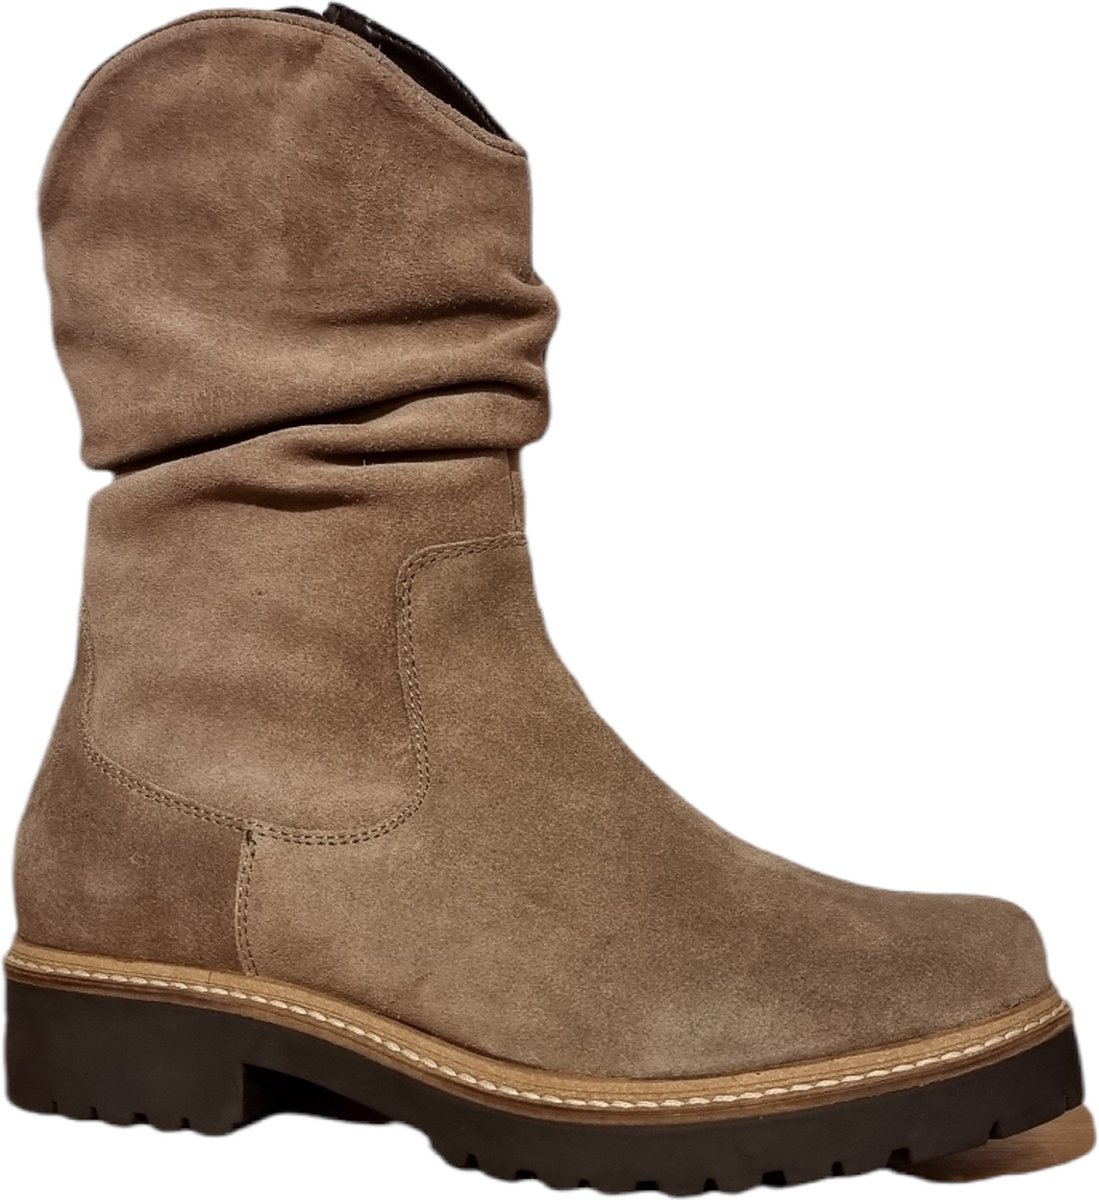 Helioform taupe suede boot art .689.004 0134 maat 4.5/37.5